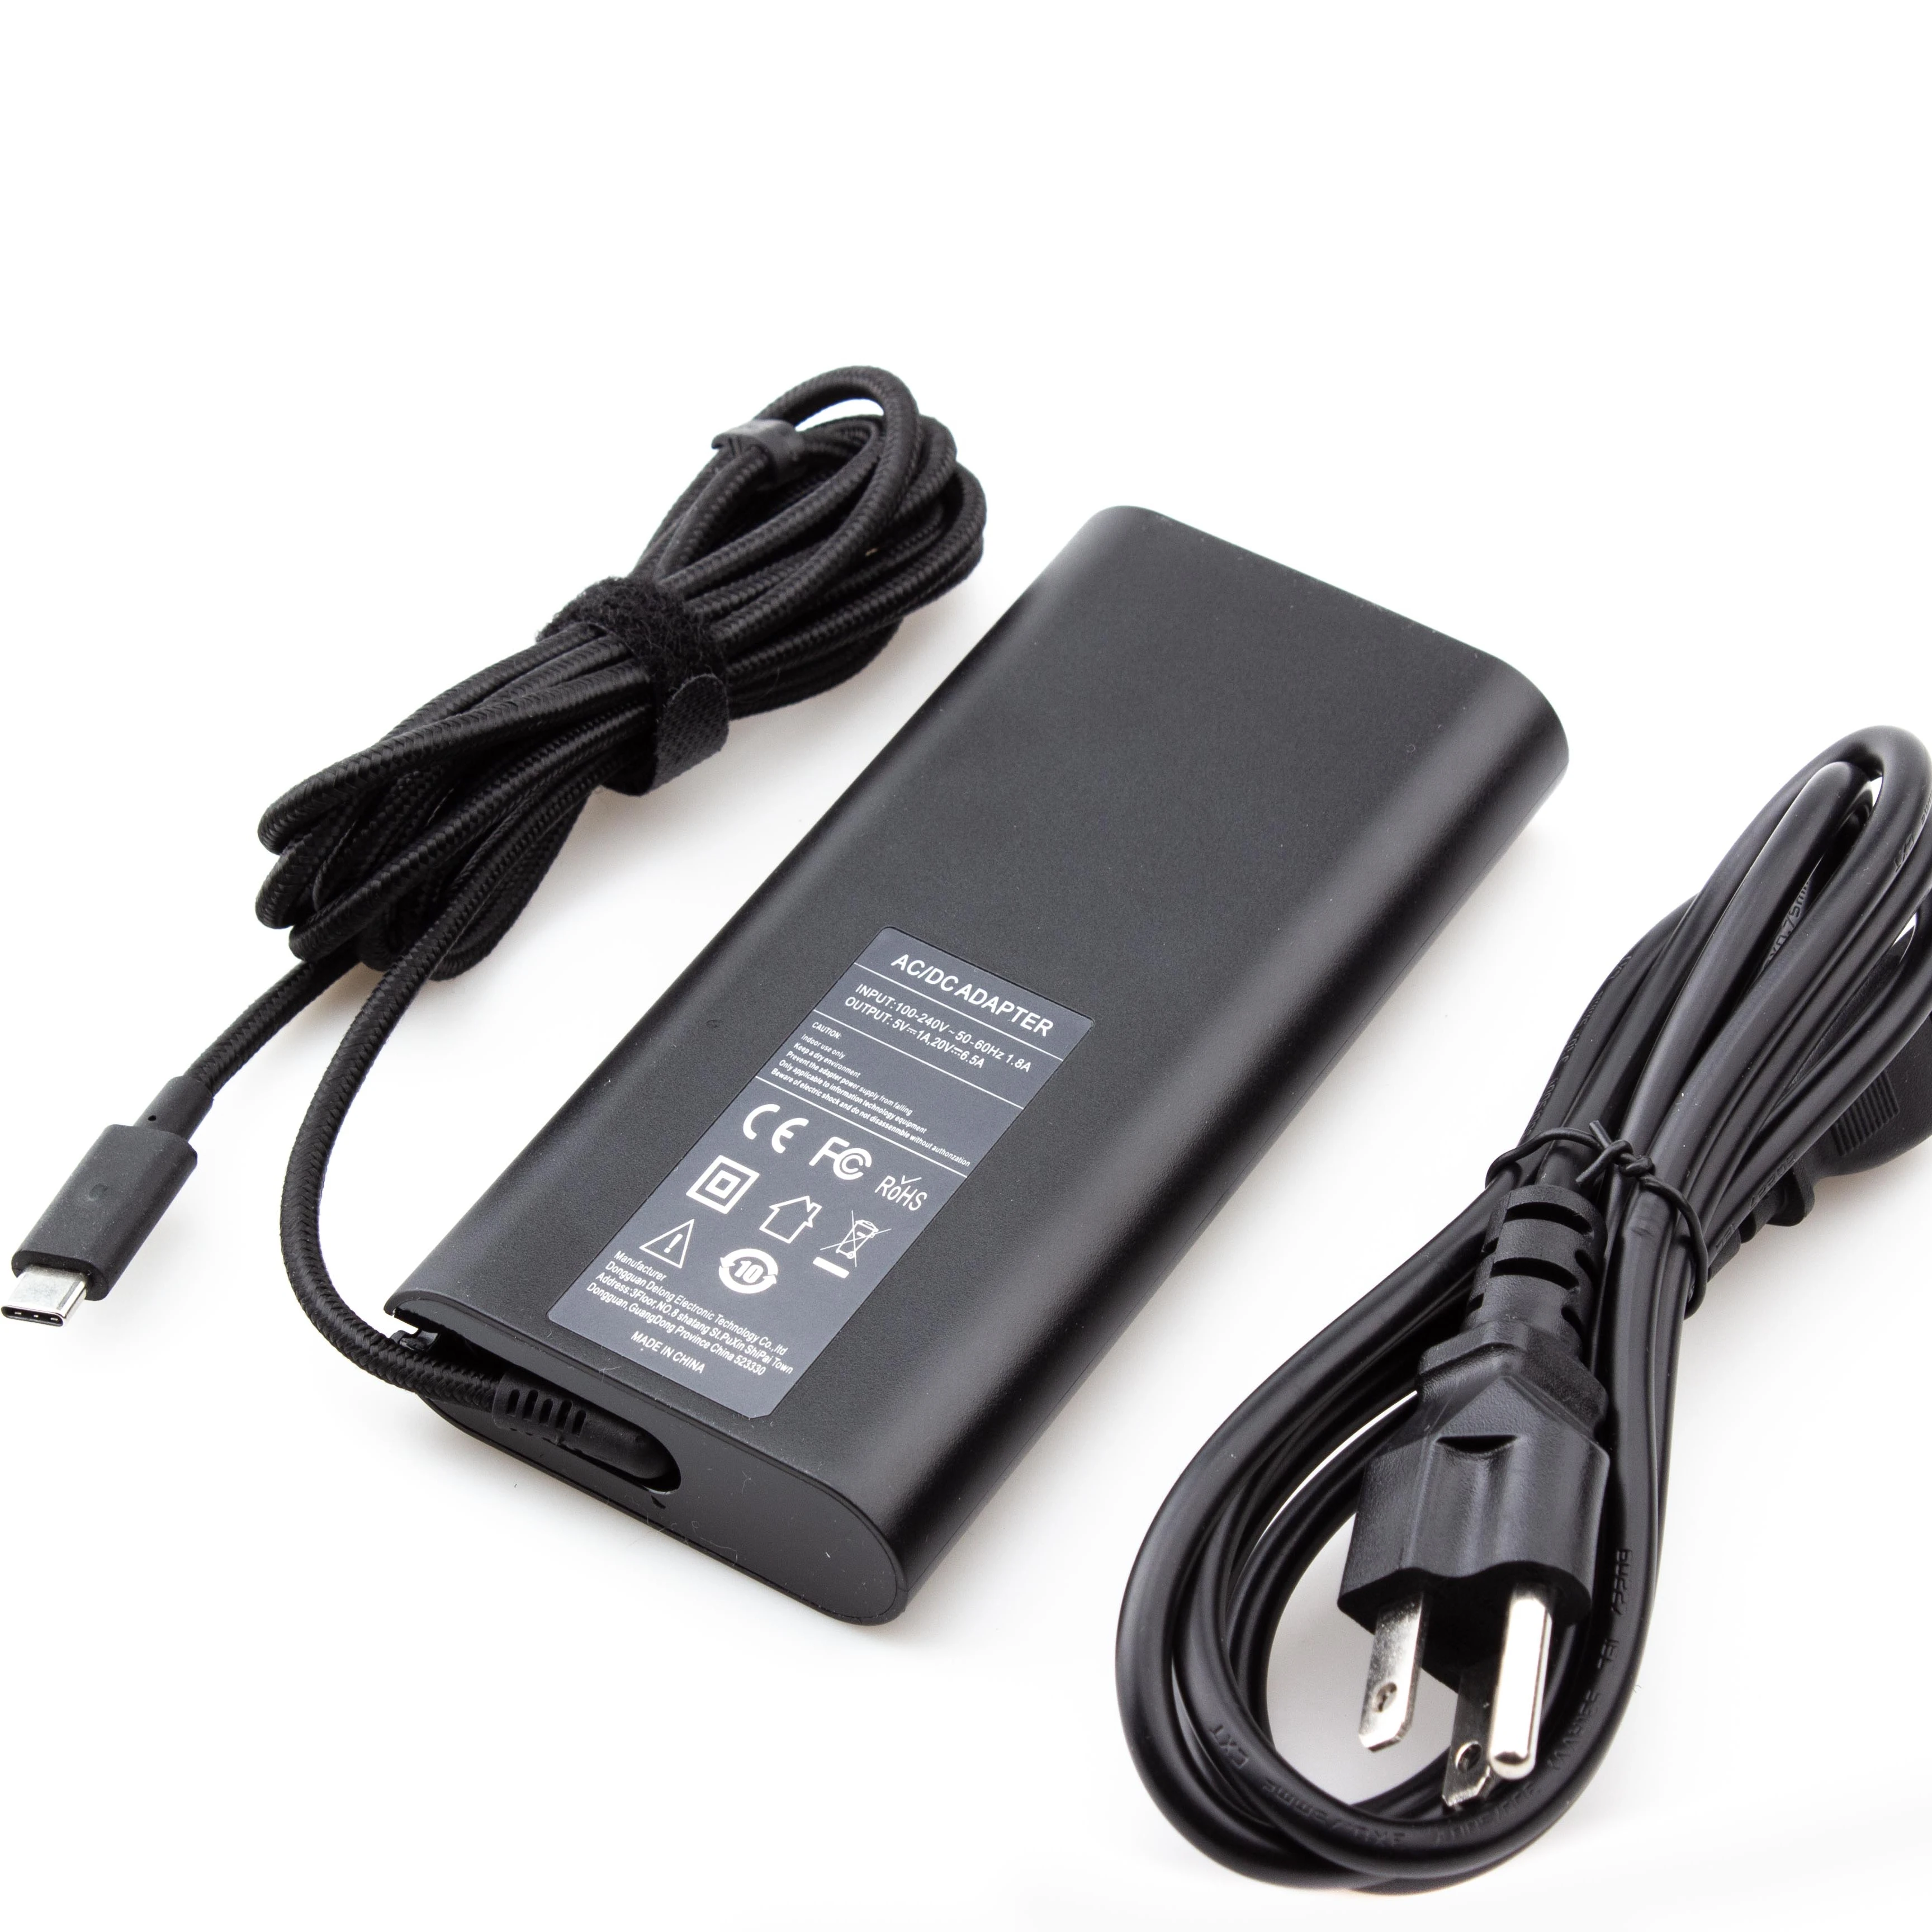 130w Charger Power Supply Type C Usb C Laptop Charger For Laptop Adapter  Dell Xps 15 9575 9500 17 9700 - Buy Da130pm170,Ha130pm170,Xps 15 Charger  Product on 